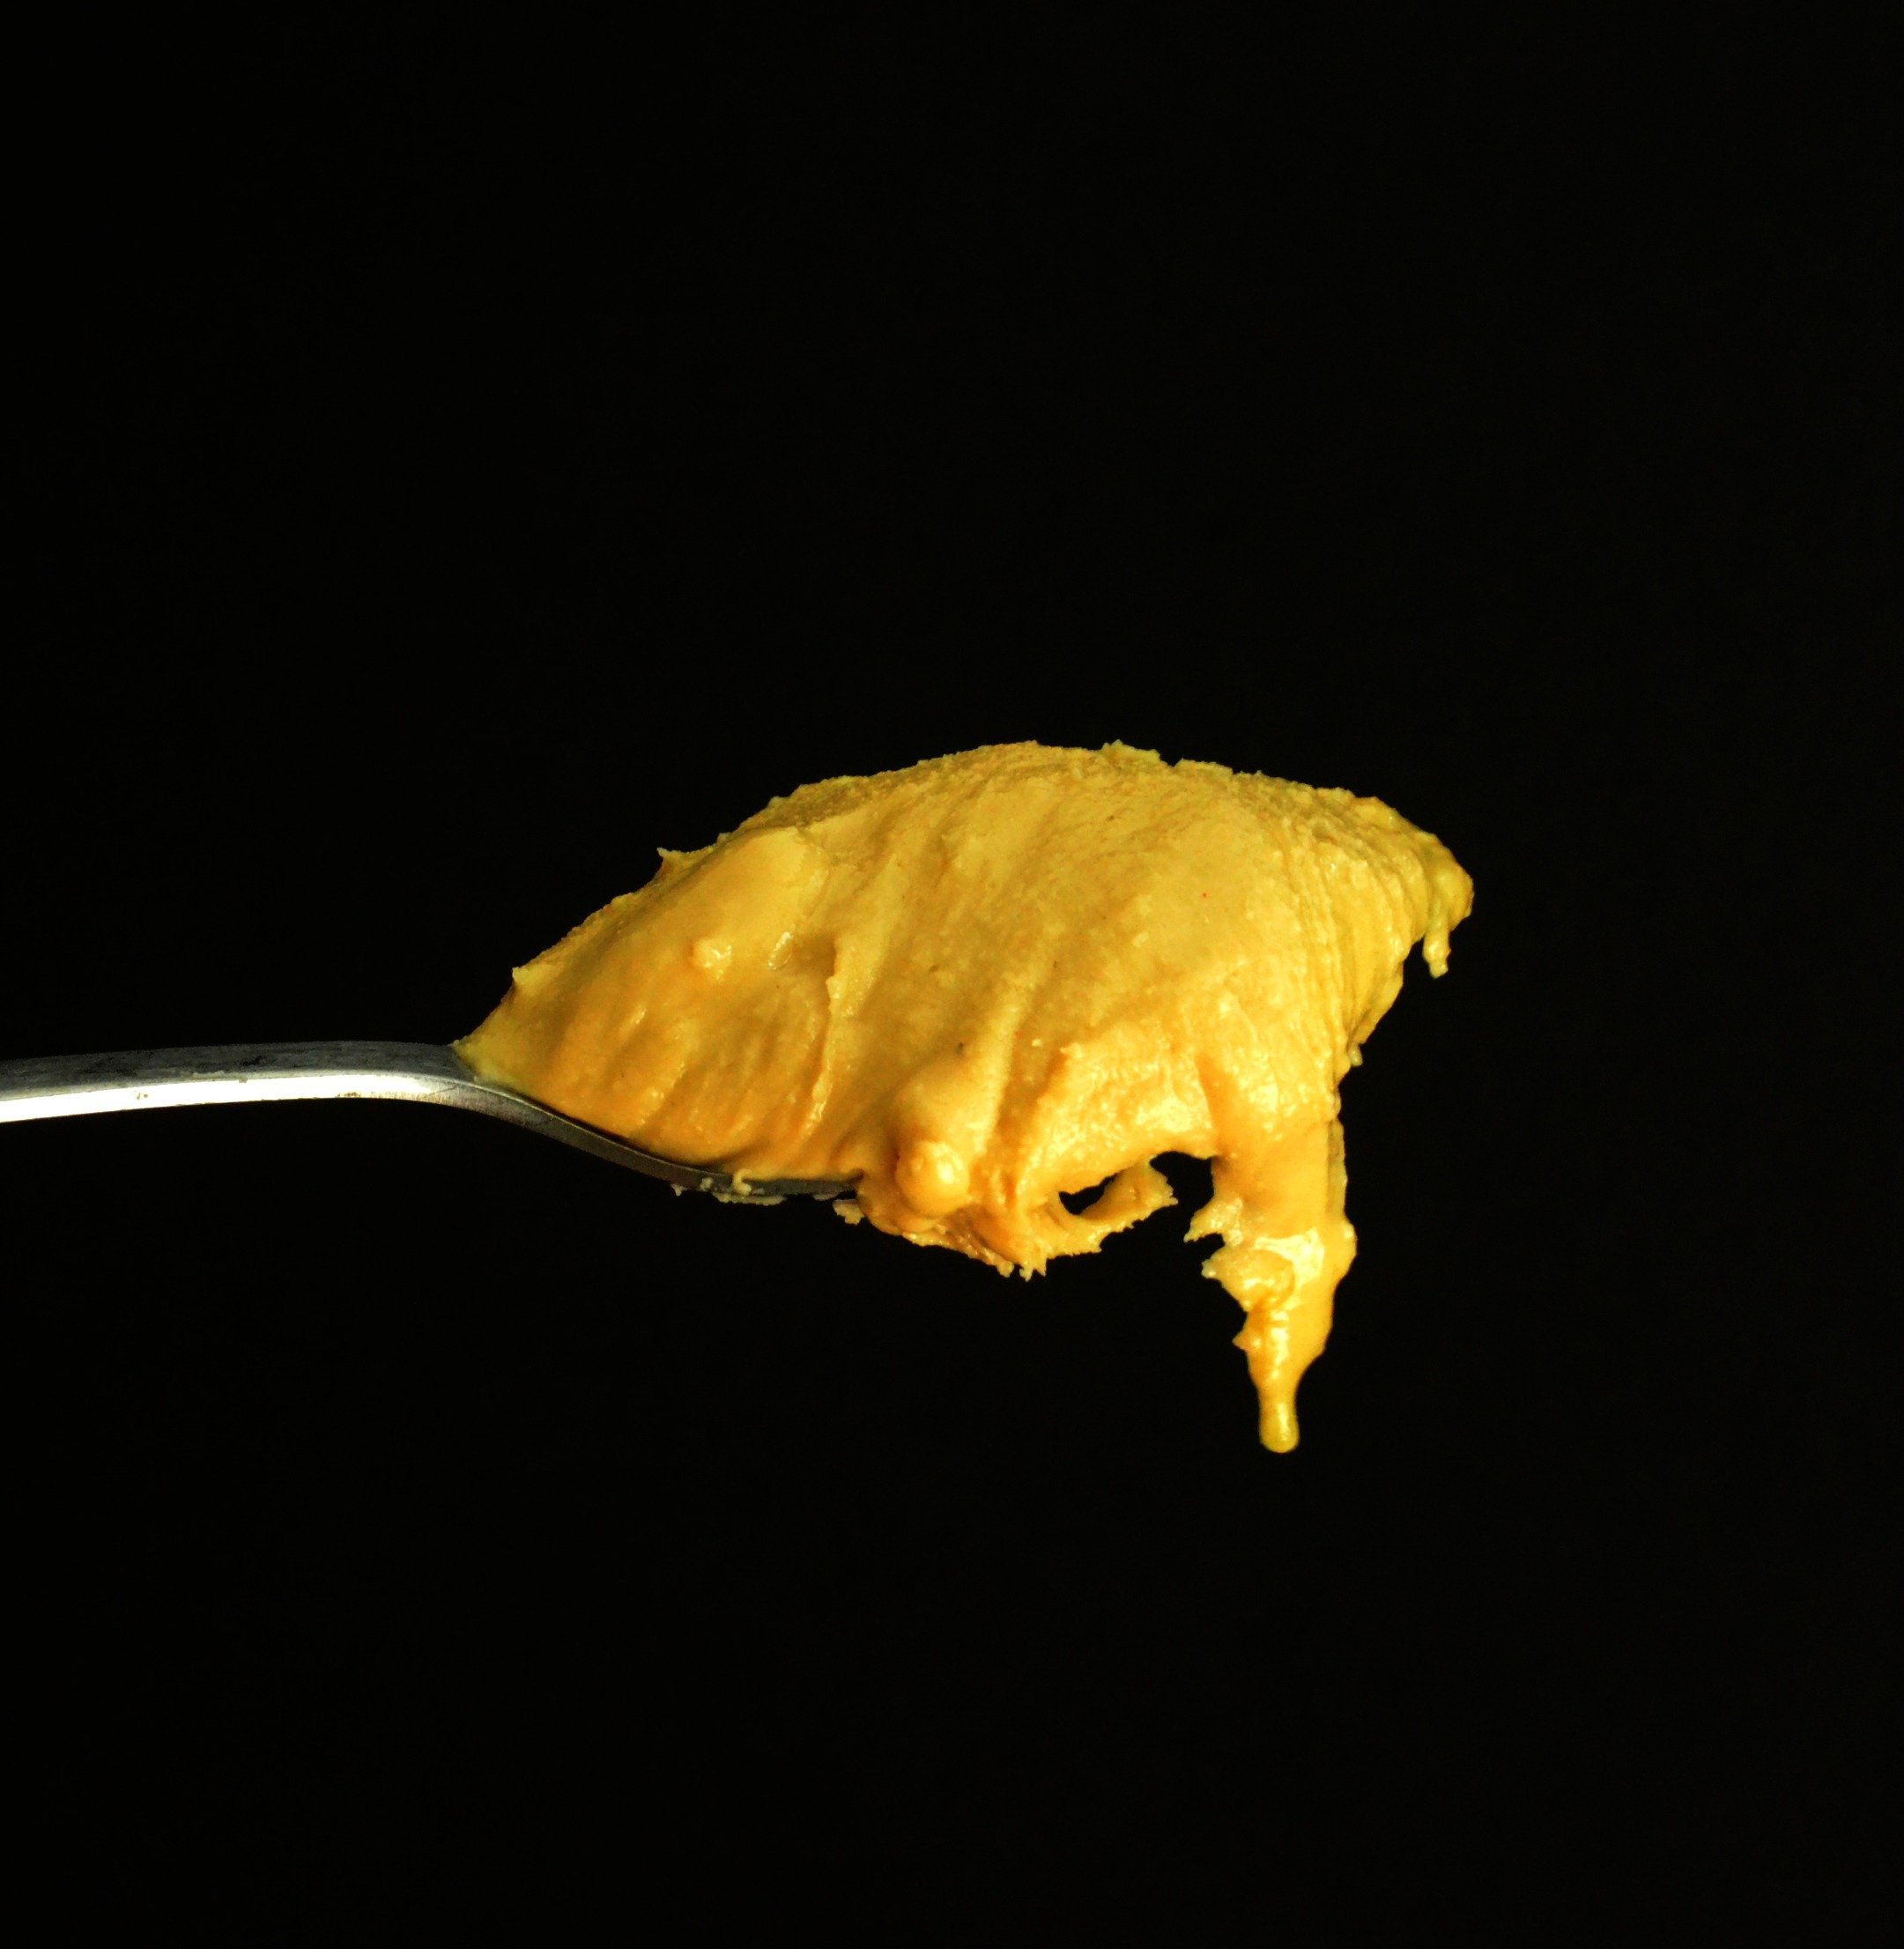 black background with cashew butter covered spoon in the foreground